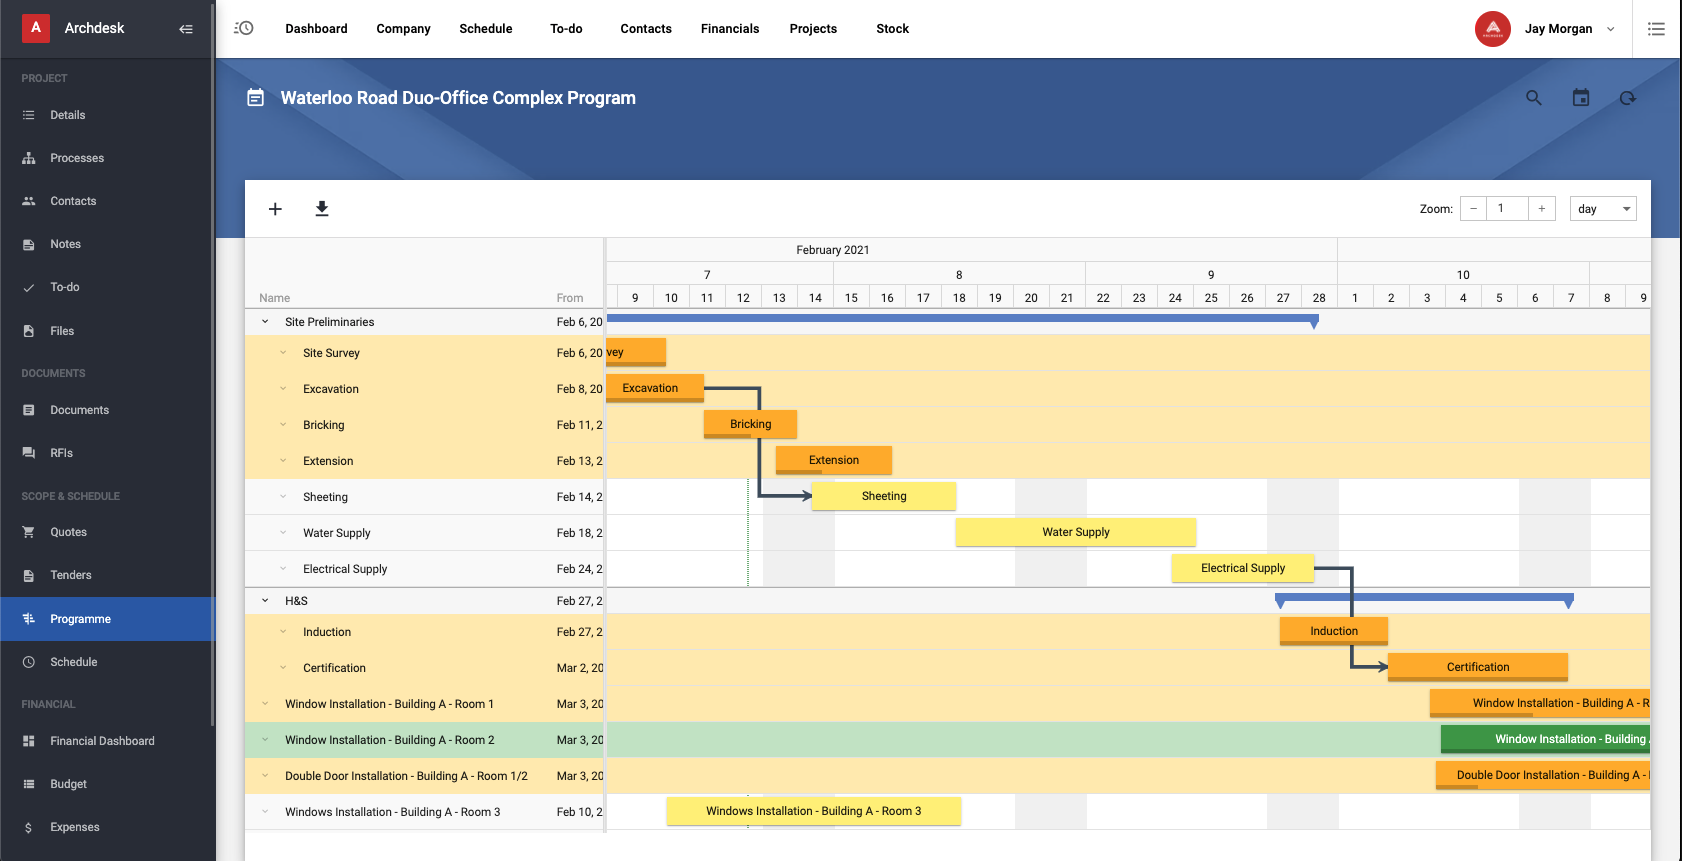 Archdesk Software - Create a well planned programme of works for your projects, manage scheduled construction tasks, resources, responsibilities, tasks, and more. Use the Gantt chart view to see your projects outview, ensuring optimisation of resources, time, and costs.